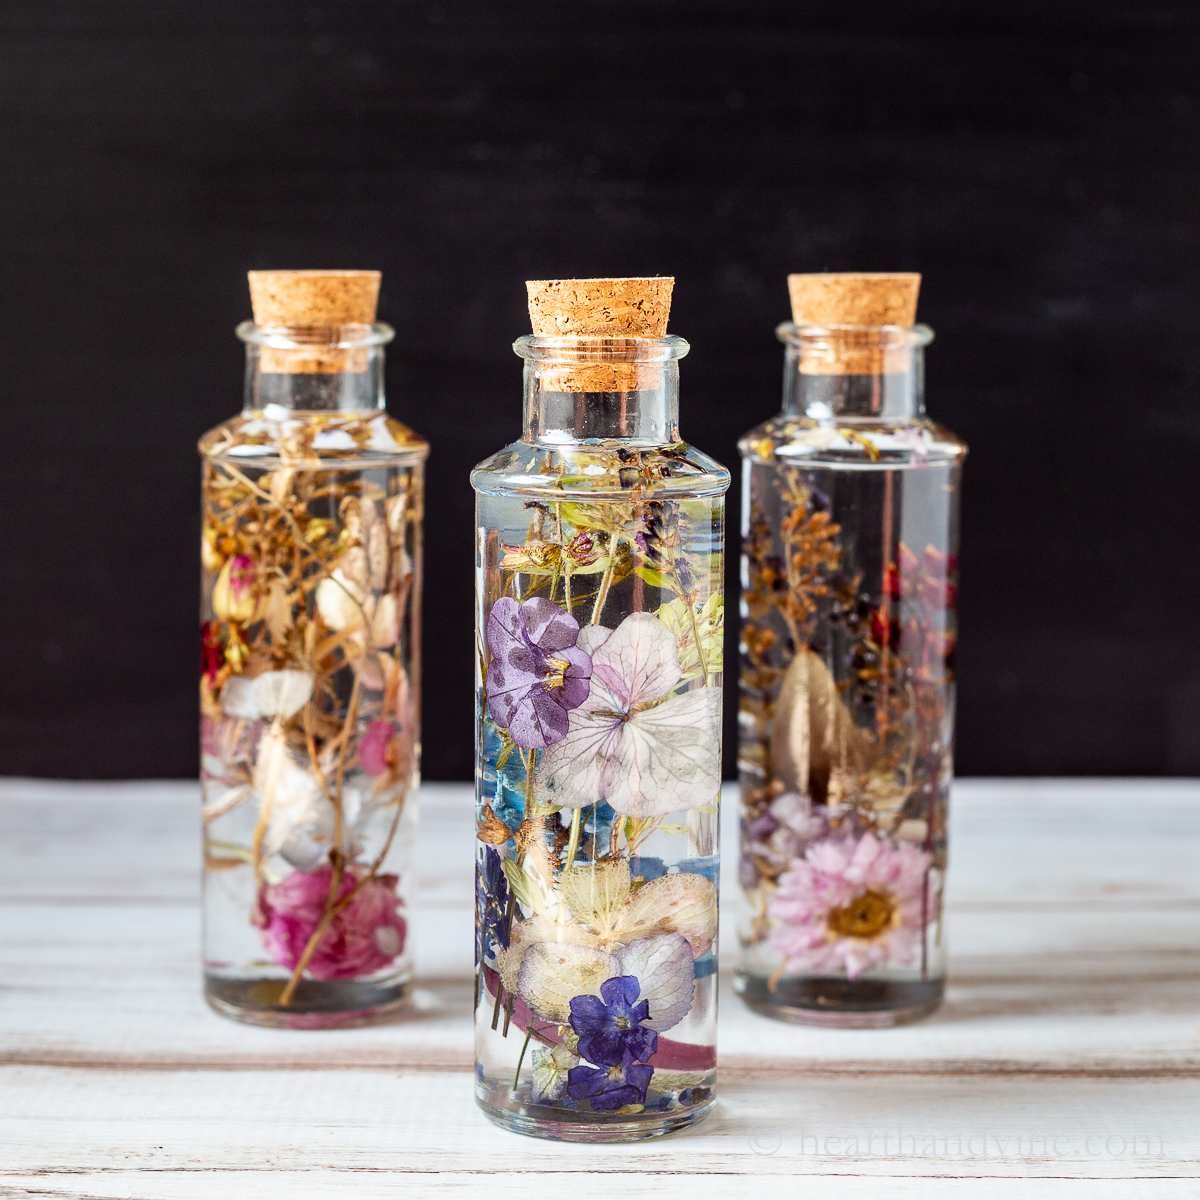 11 Brilliant Ways to Reuse Empty Perfume Bottles - The Beauty Store